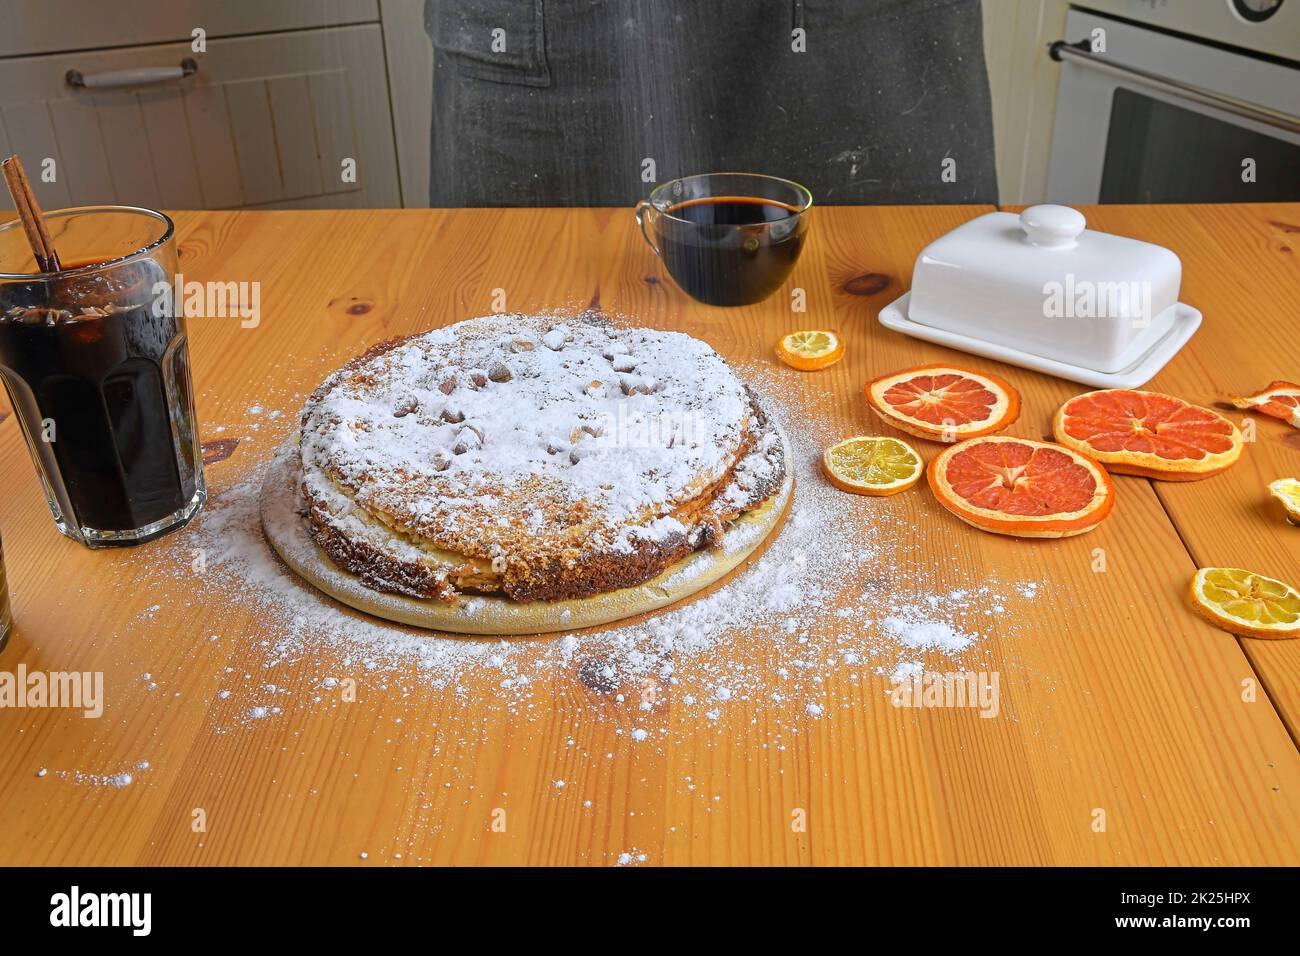 Man sprinkles powdered sugar on home-made cake. A wooden table and kitchen background Stock Photo